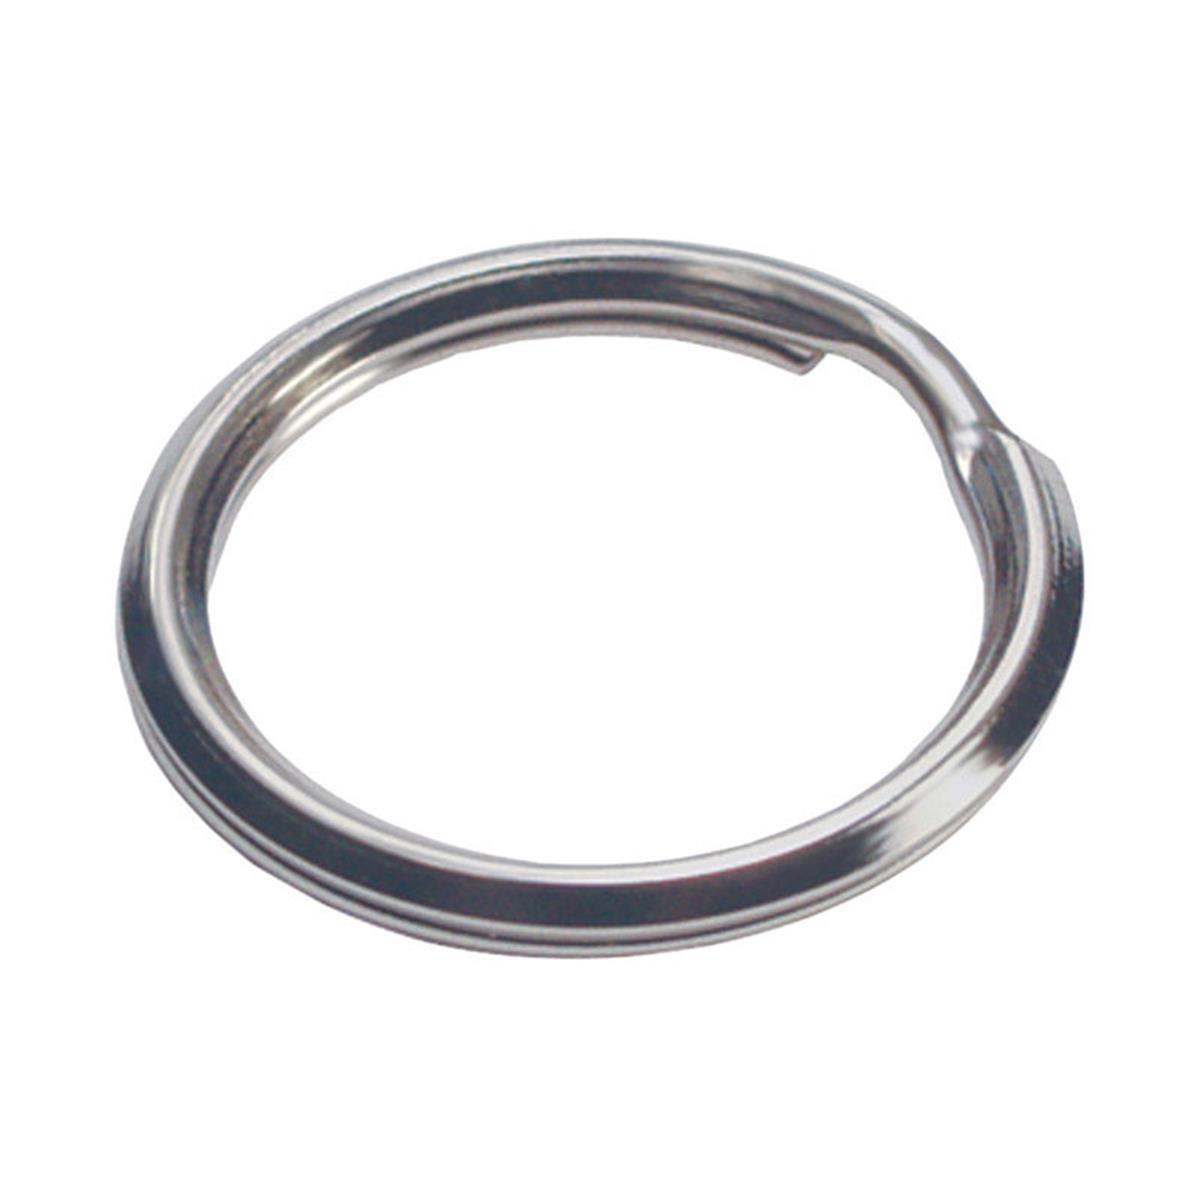 Picture of Hillman 5936638 Tempered Steel Rings & Cable Key Ring, Silver - Pack of 50